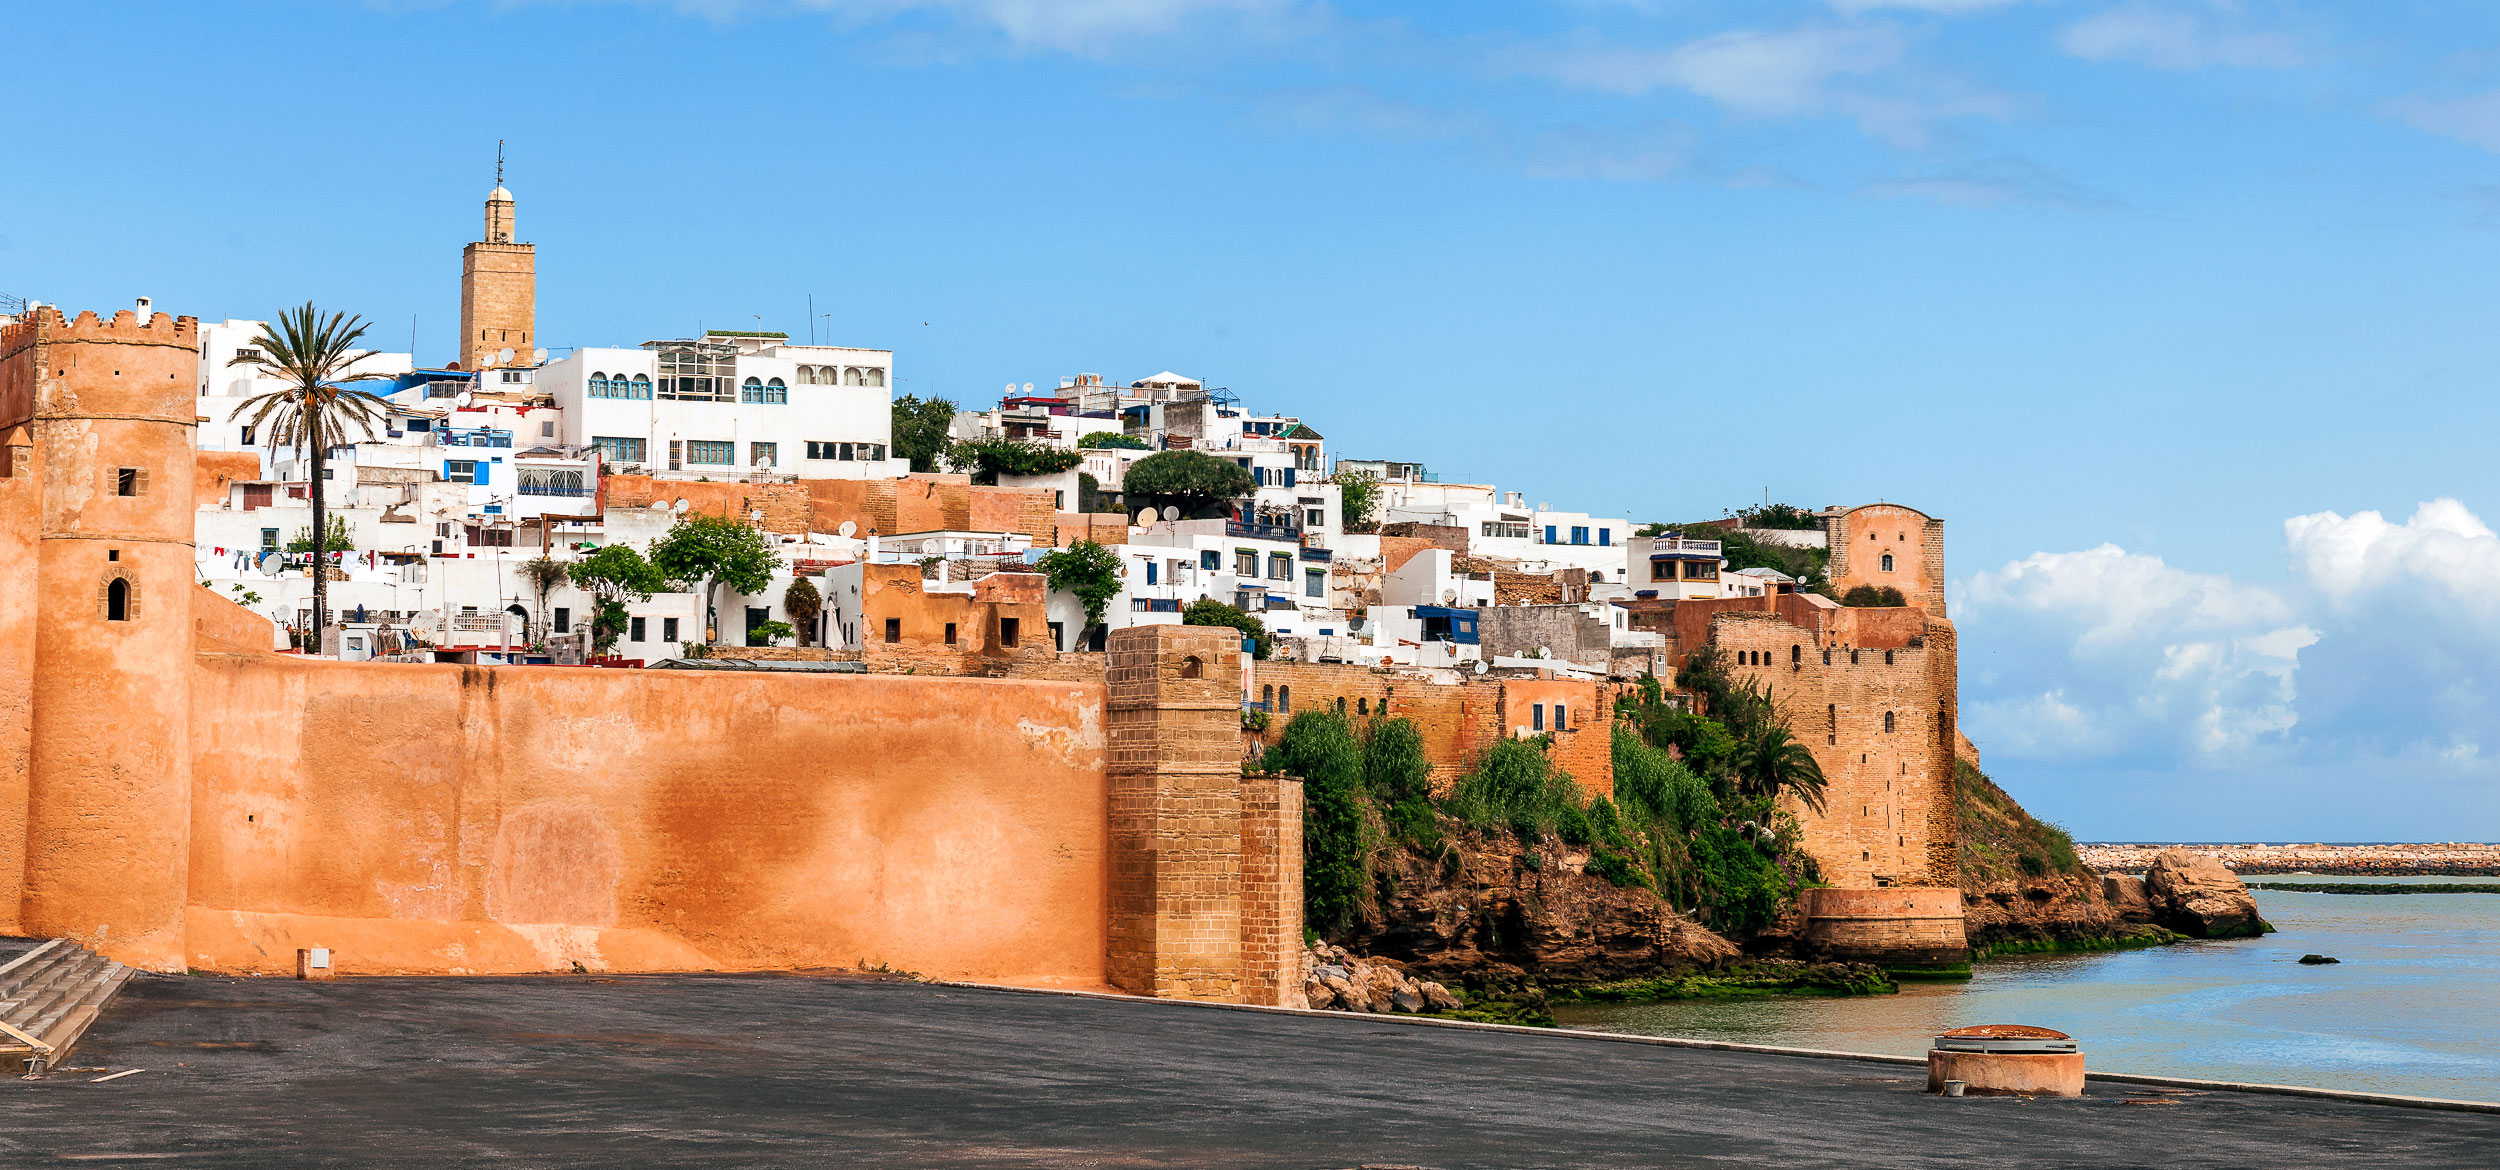 Kasbah of the Udayès overlooks the Bou Regreg River in Rabat, Morocco.